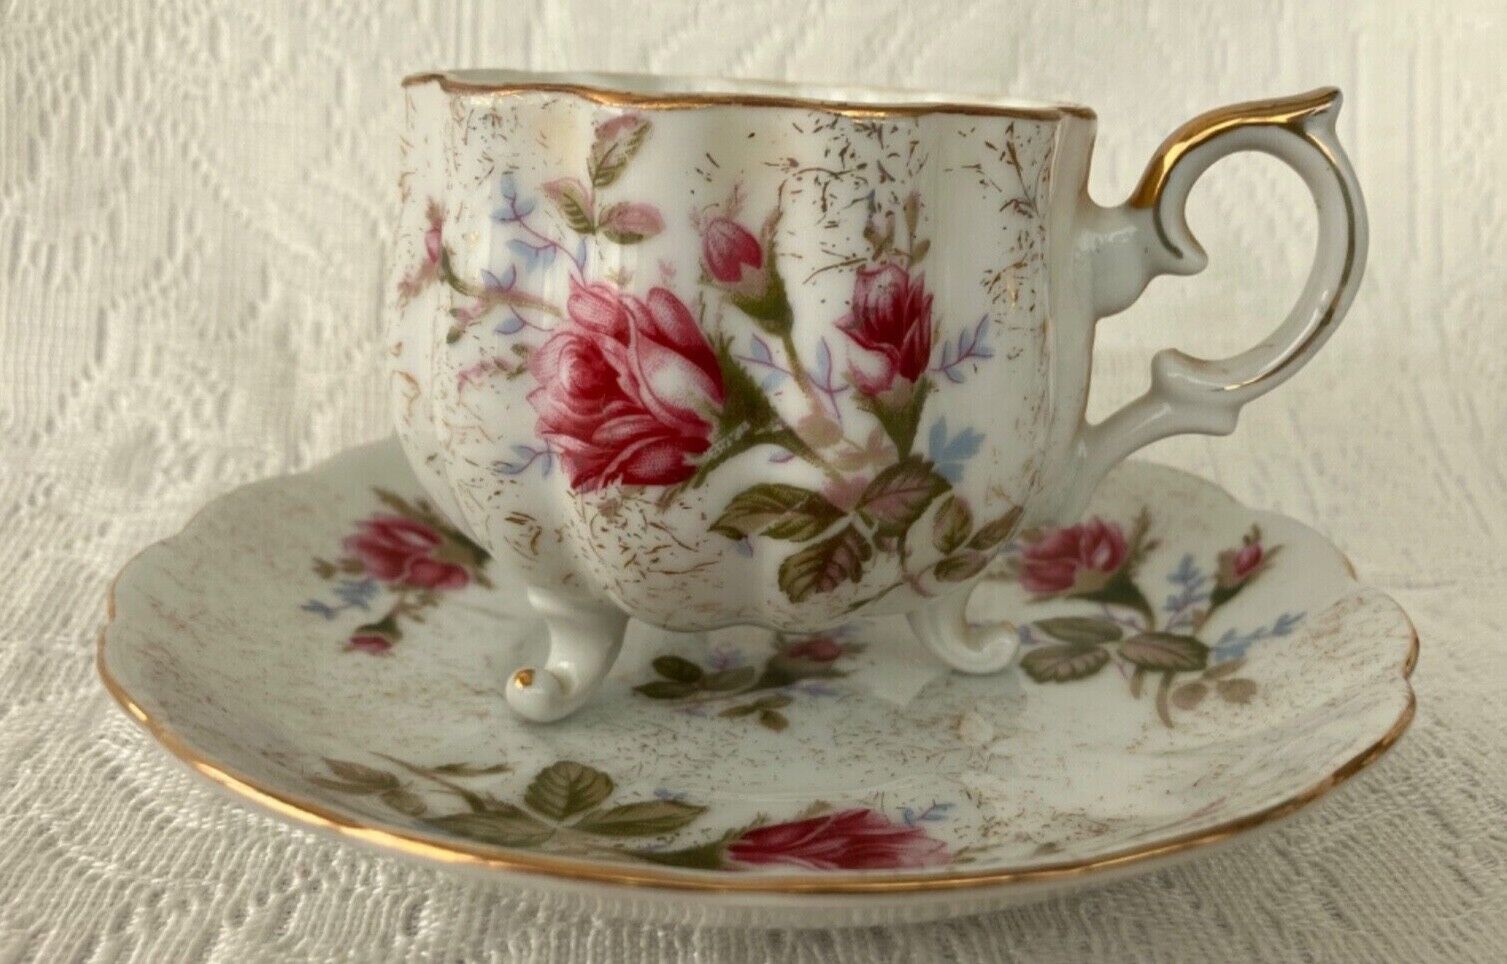 Vintage Marco China Teacup & Saucer 3 Footed Cup Pink Roses Excellent